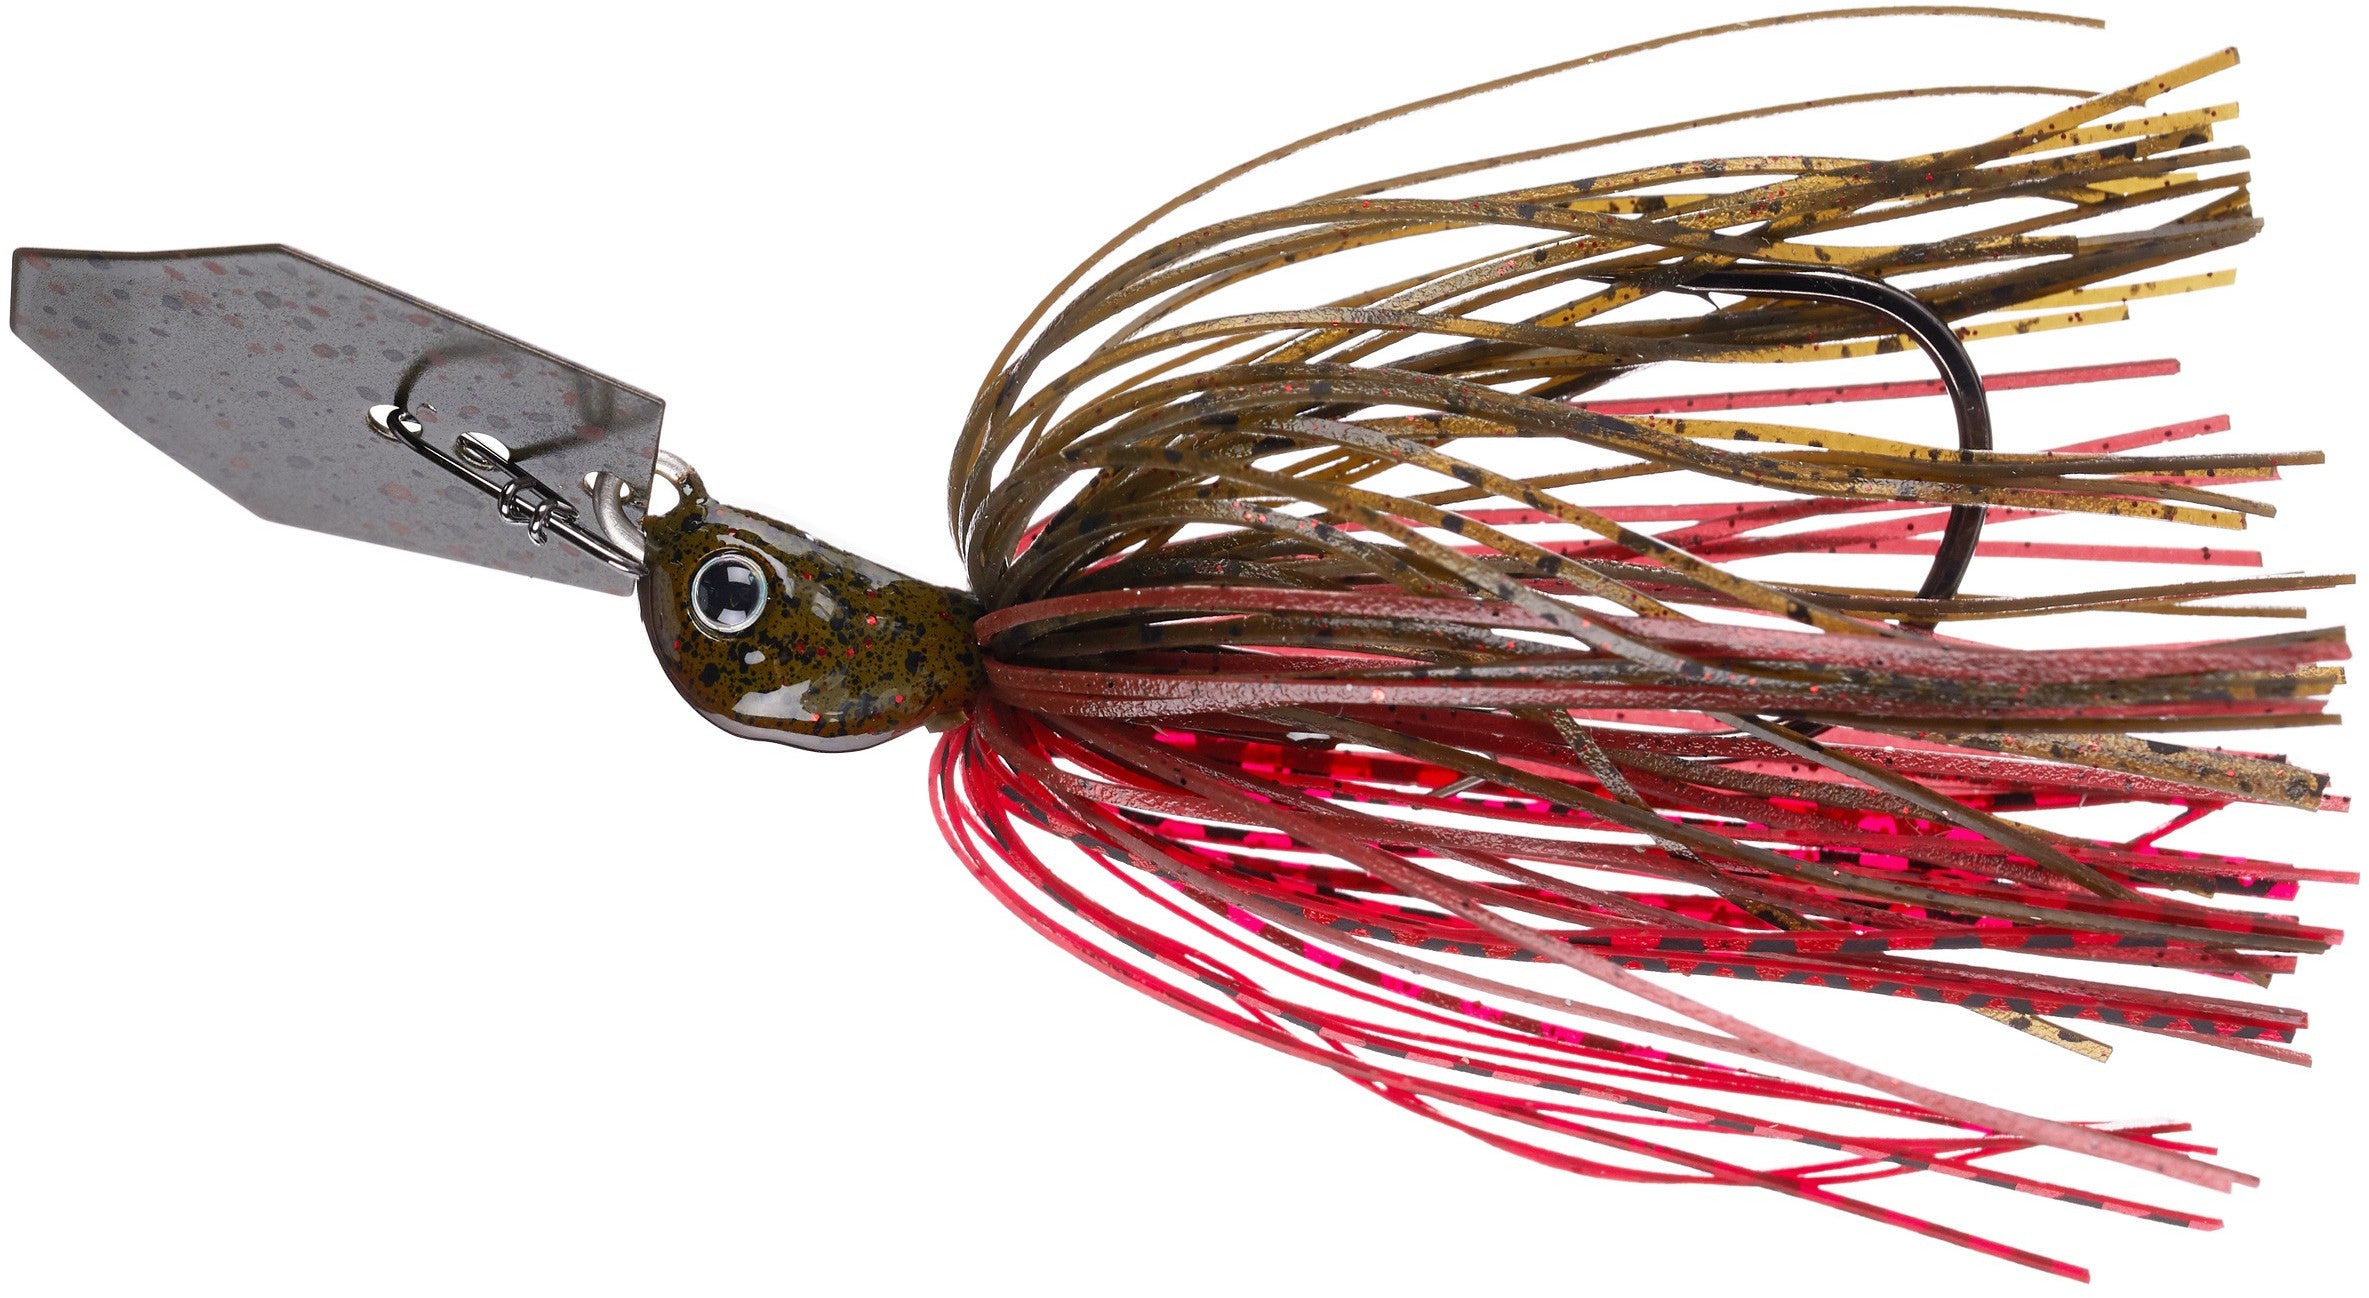 Z-Man Chatterbait Jack Hammer 3/8oz Ghost Baby Gill  CBJH38-22 - American  Legacy Fishing, G Loomis Superstore